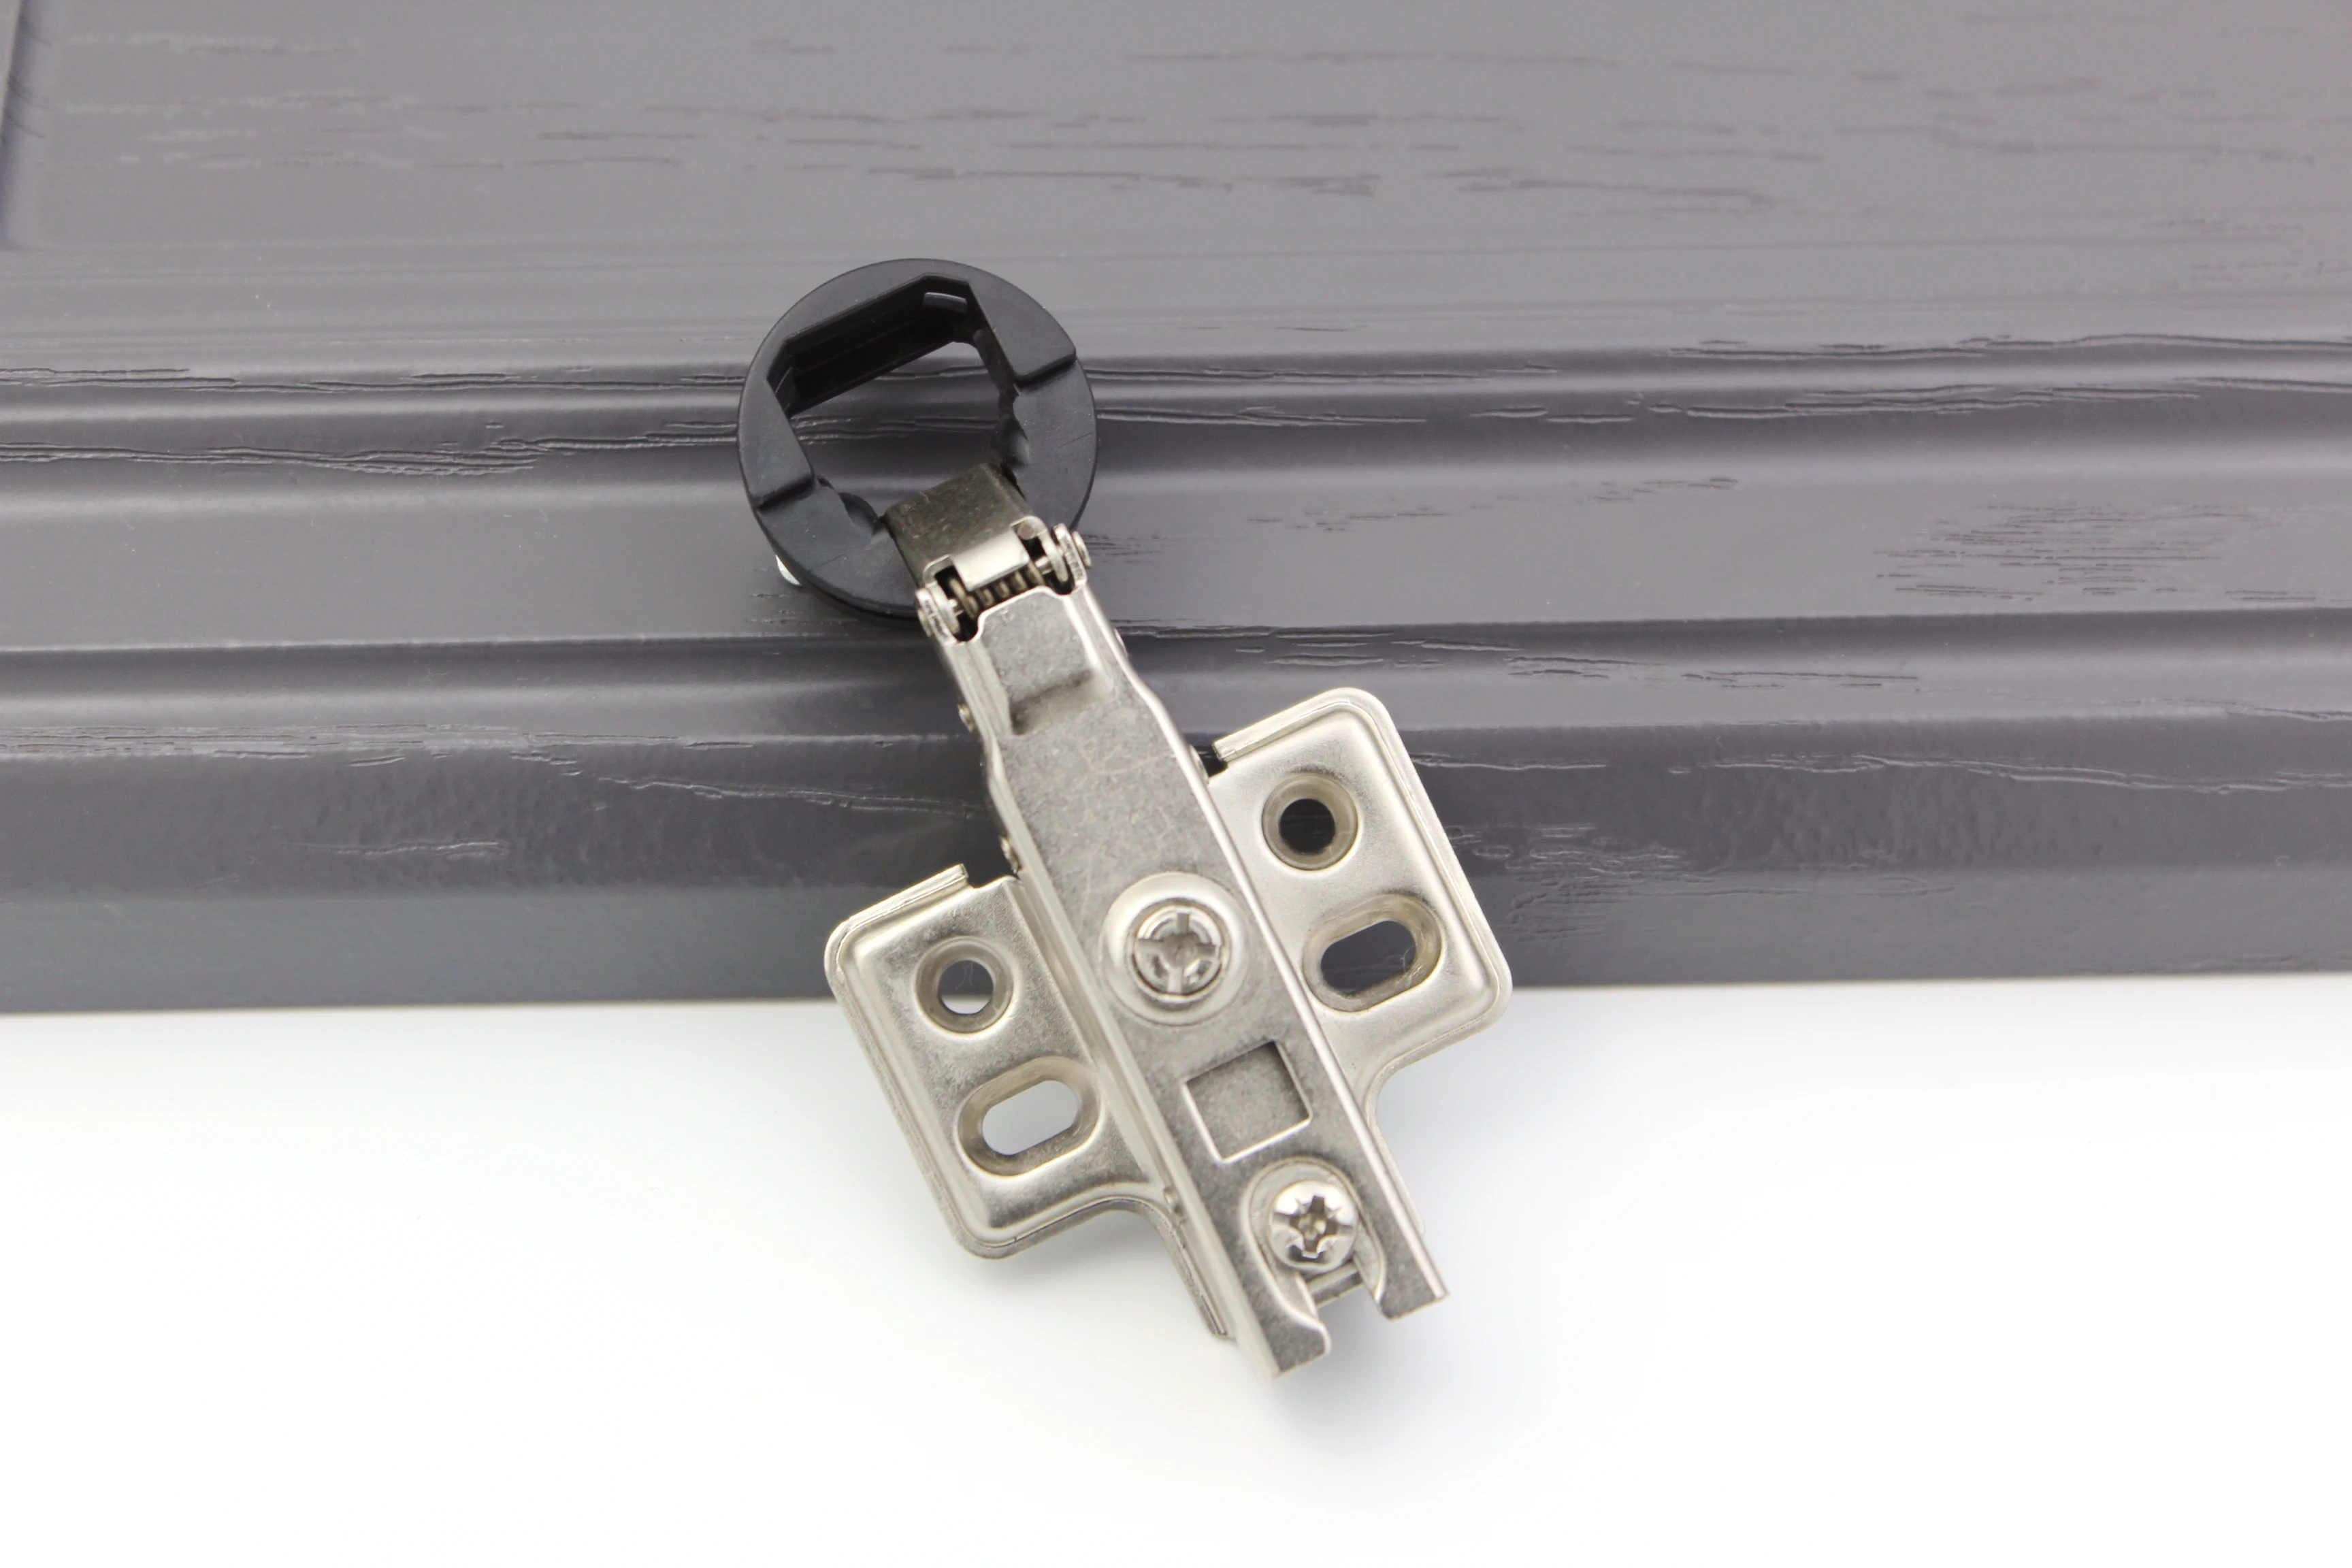 95 degree iron material for soft close door hinges